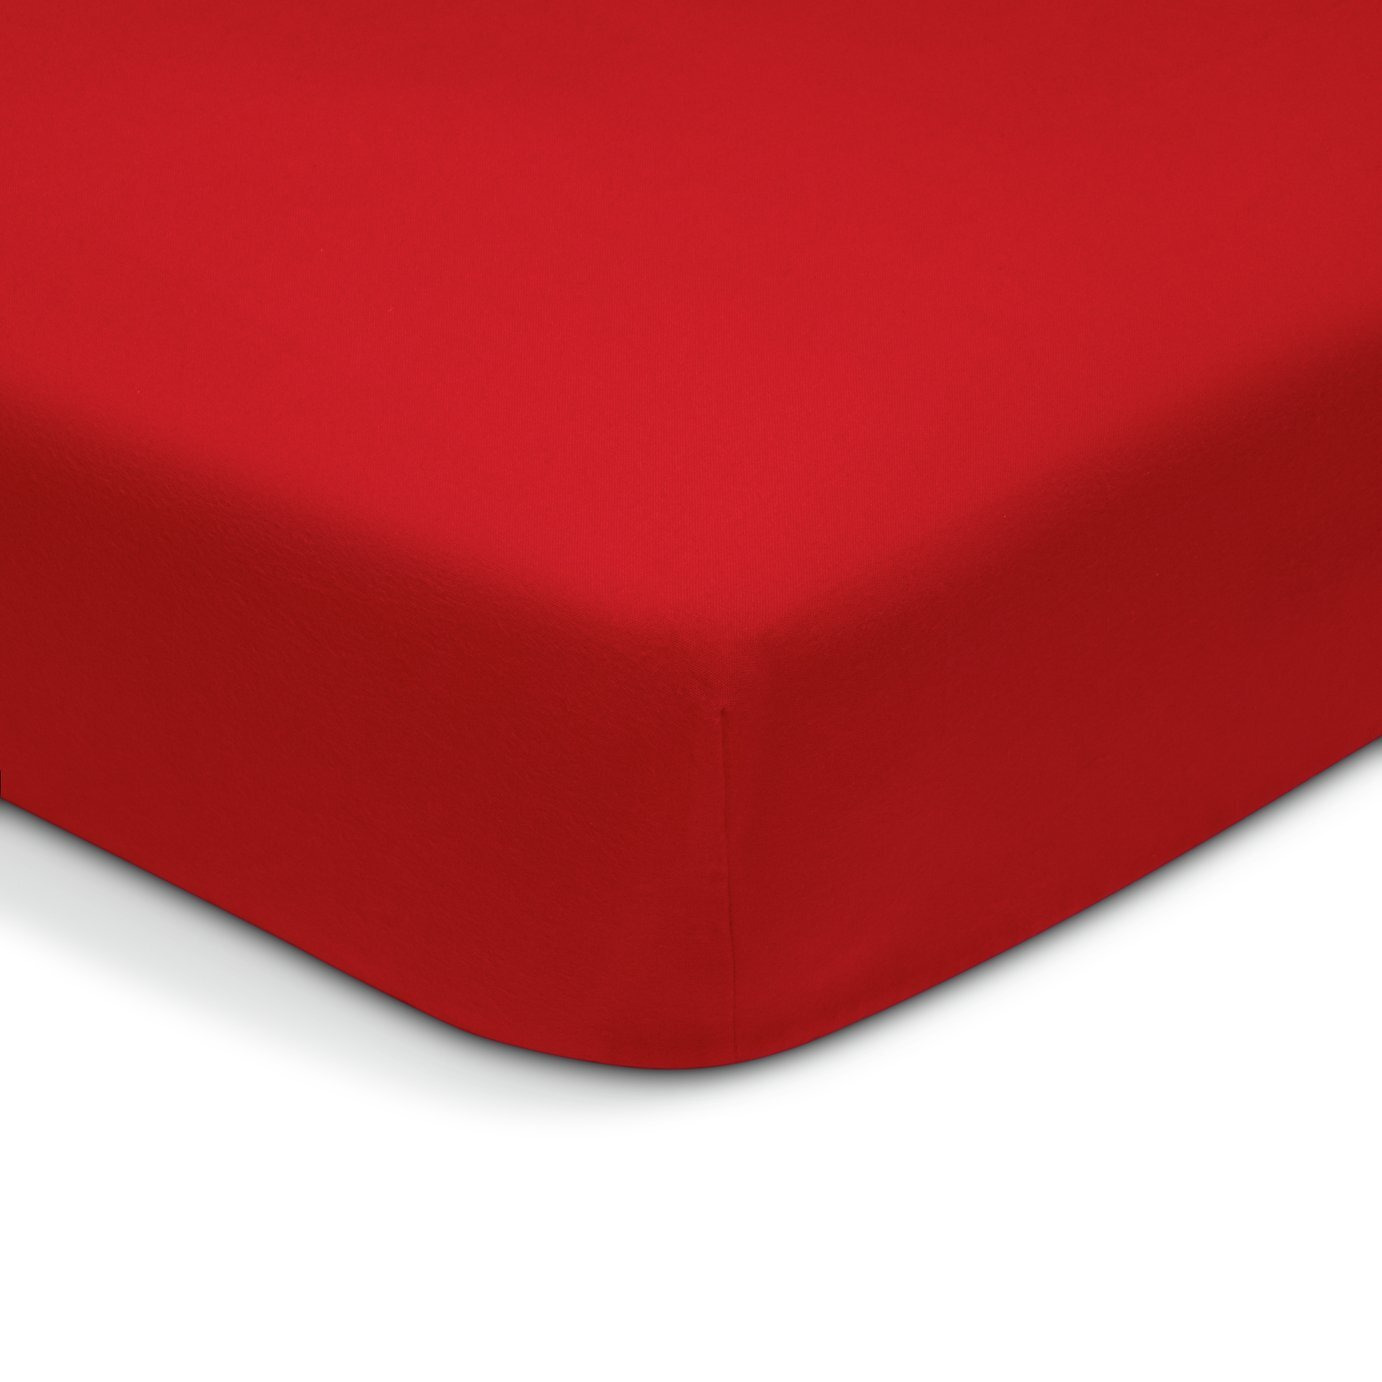 Habitat Brushed Cotton Red Fitted Sheet - King size - image 1